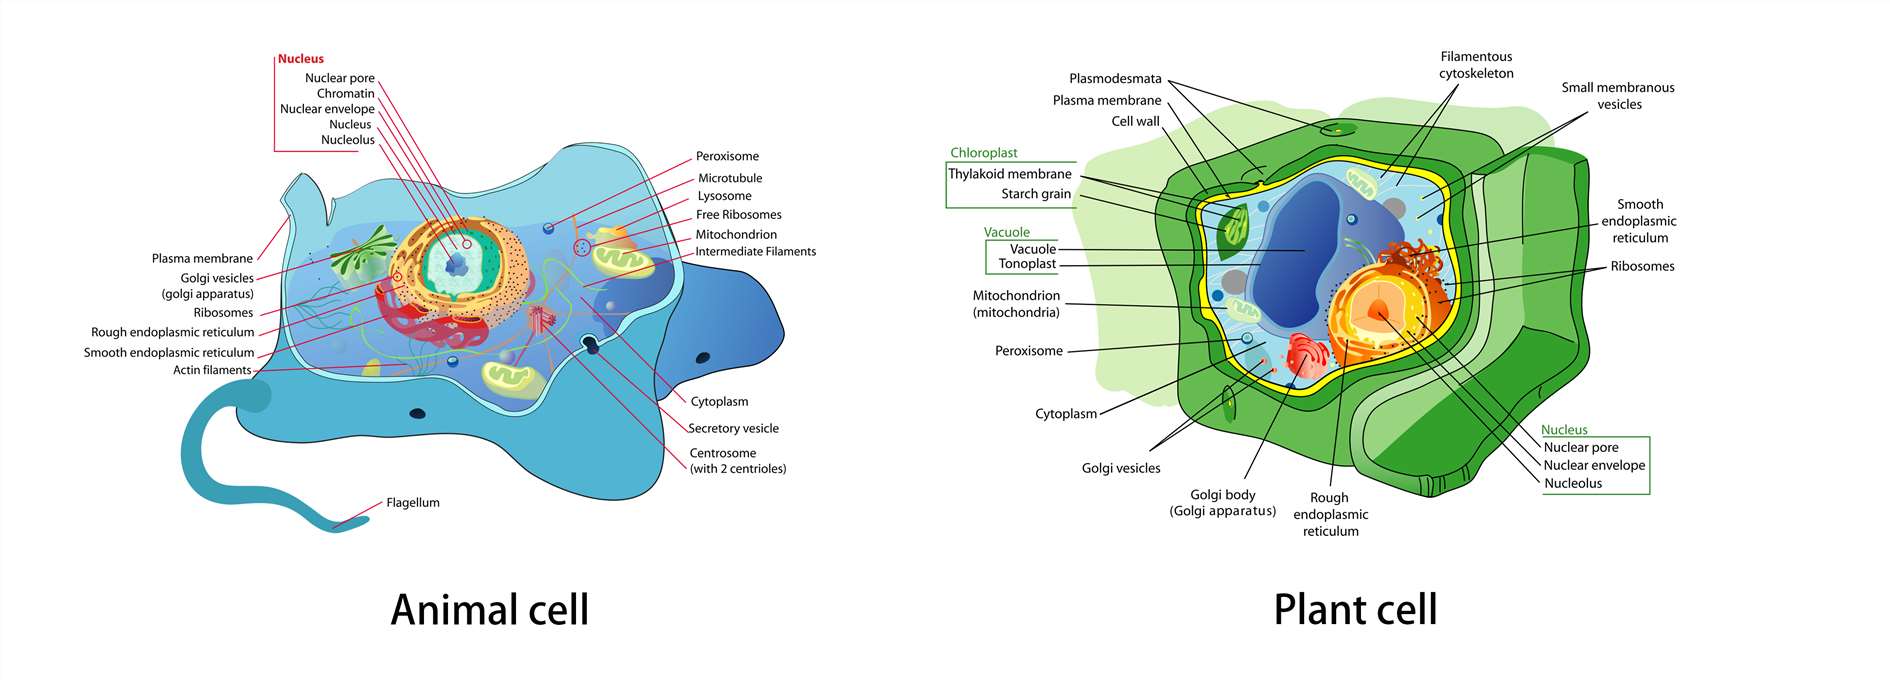 Structure of a typical animal cell and plant cell.